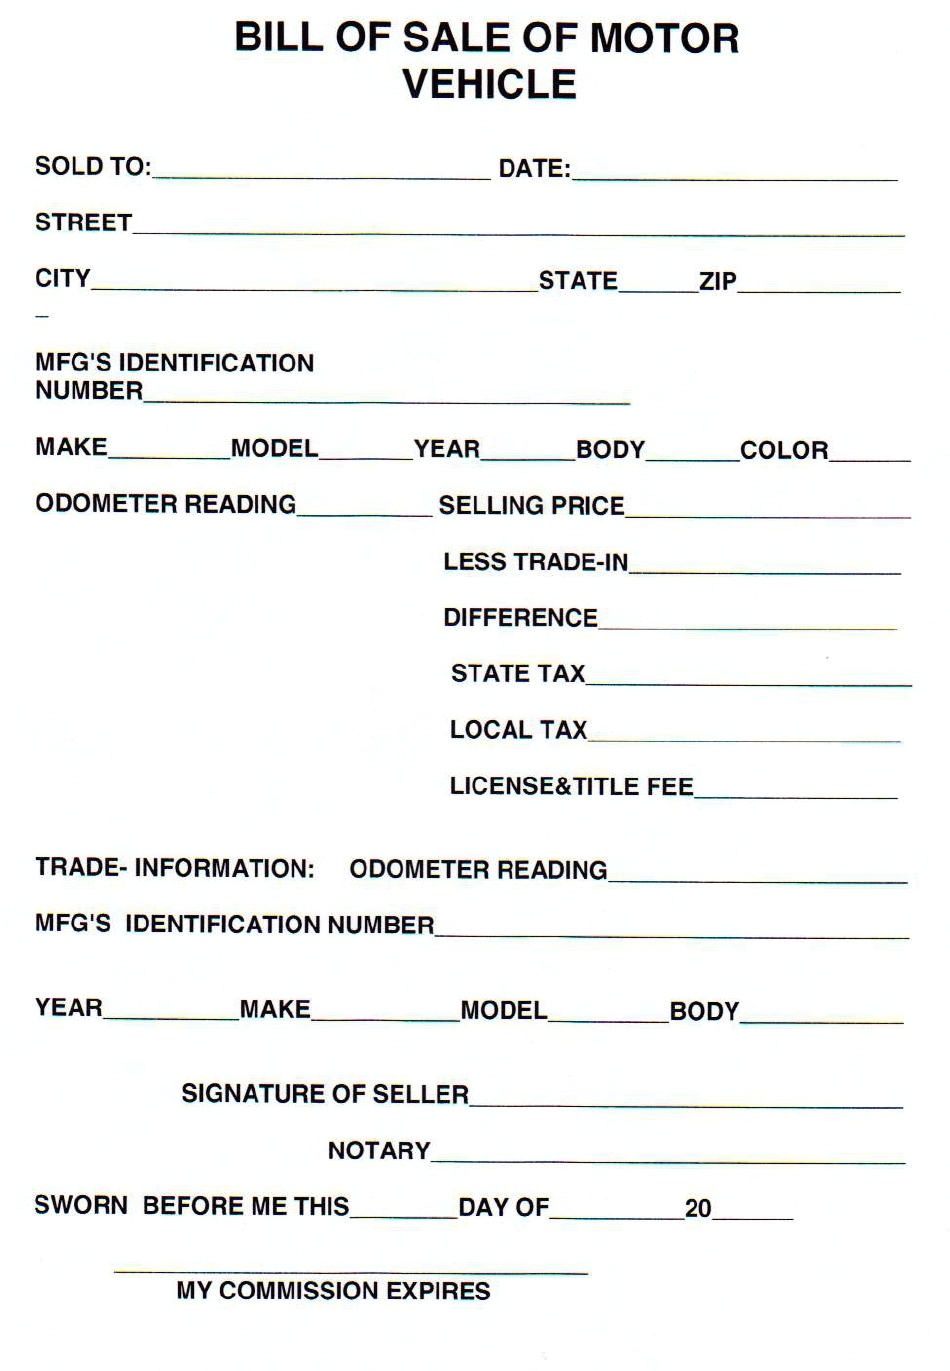 Hancock County, Tennessee Bill of Sale of Motor Vehicle Download